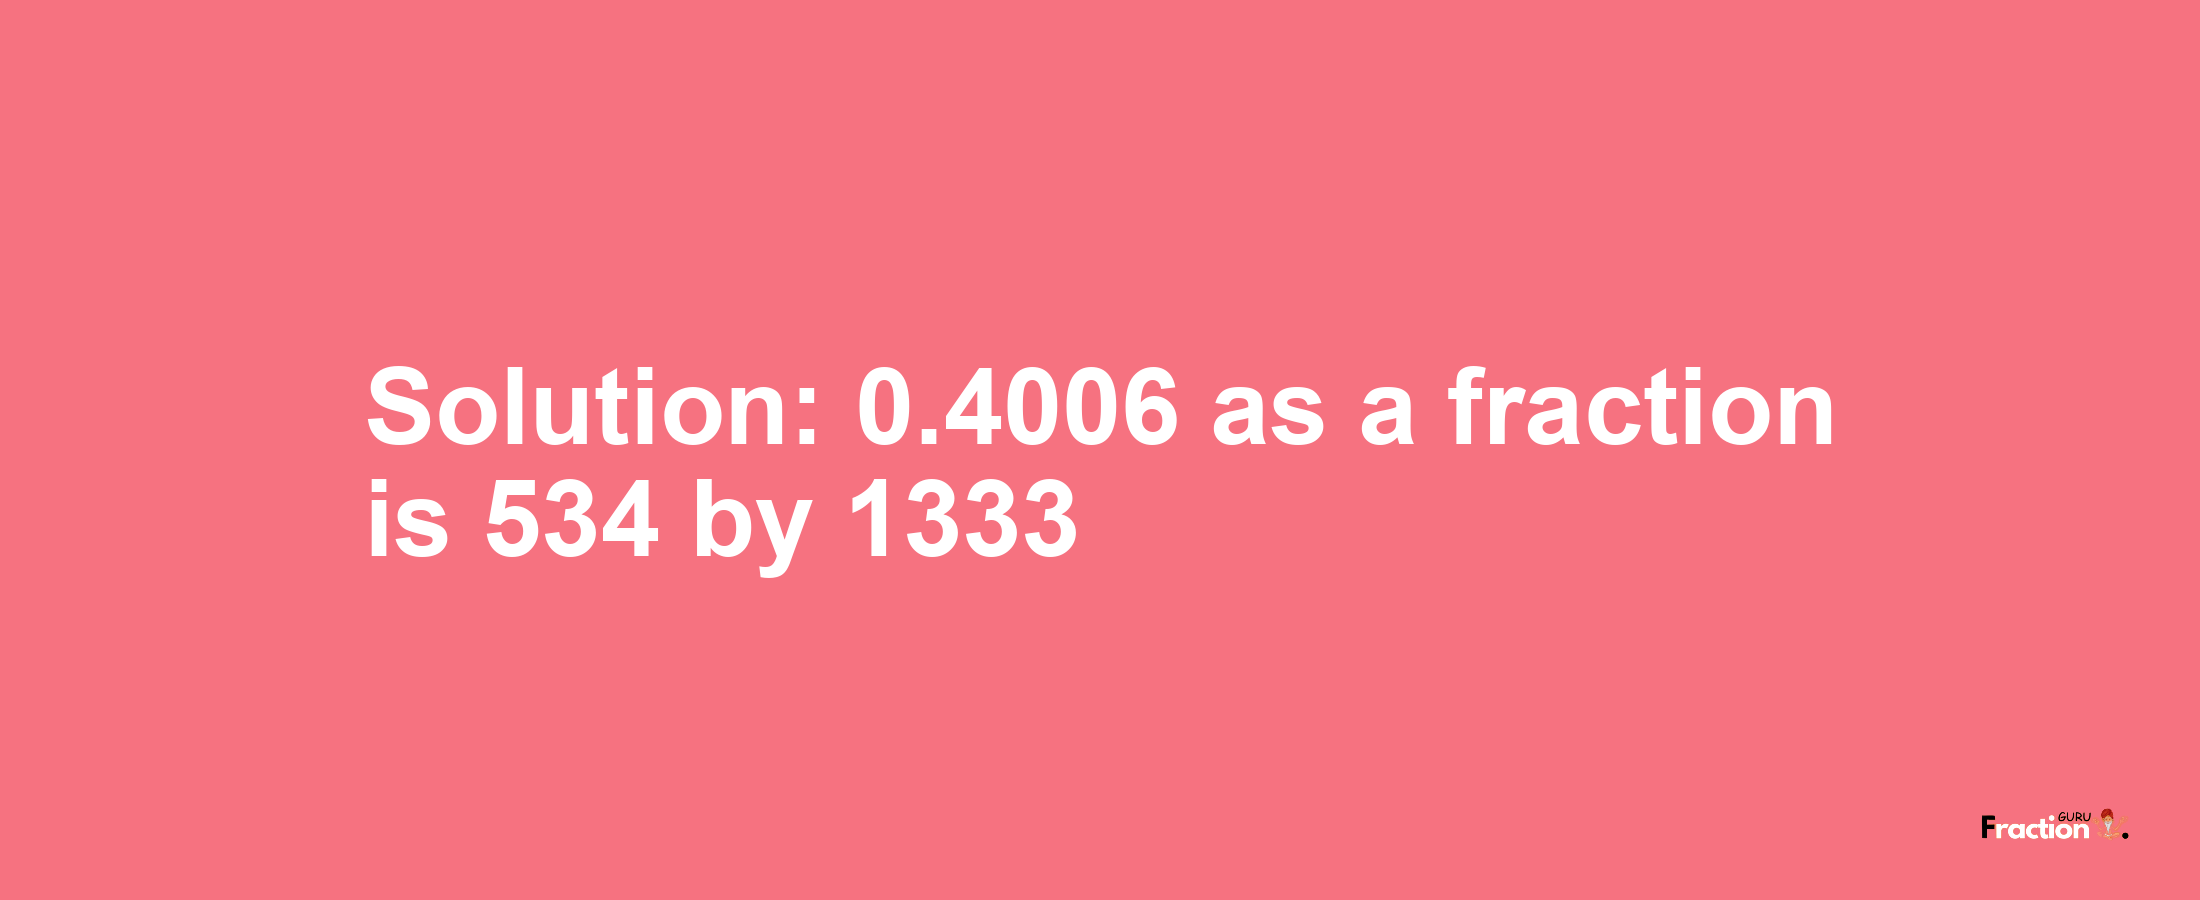 Solution:0.4006 as a fraction is 534/1333